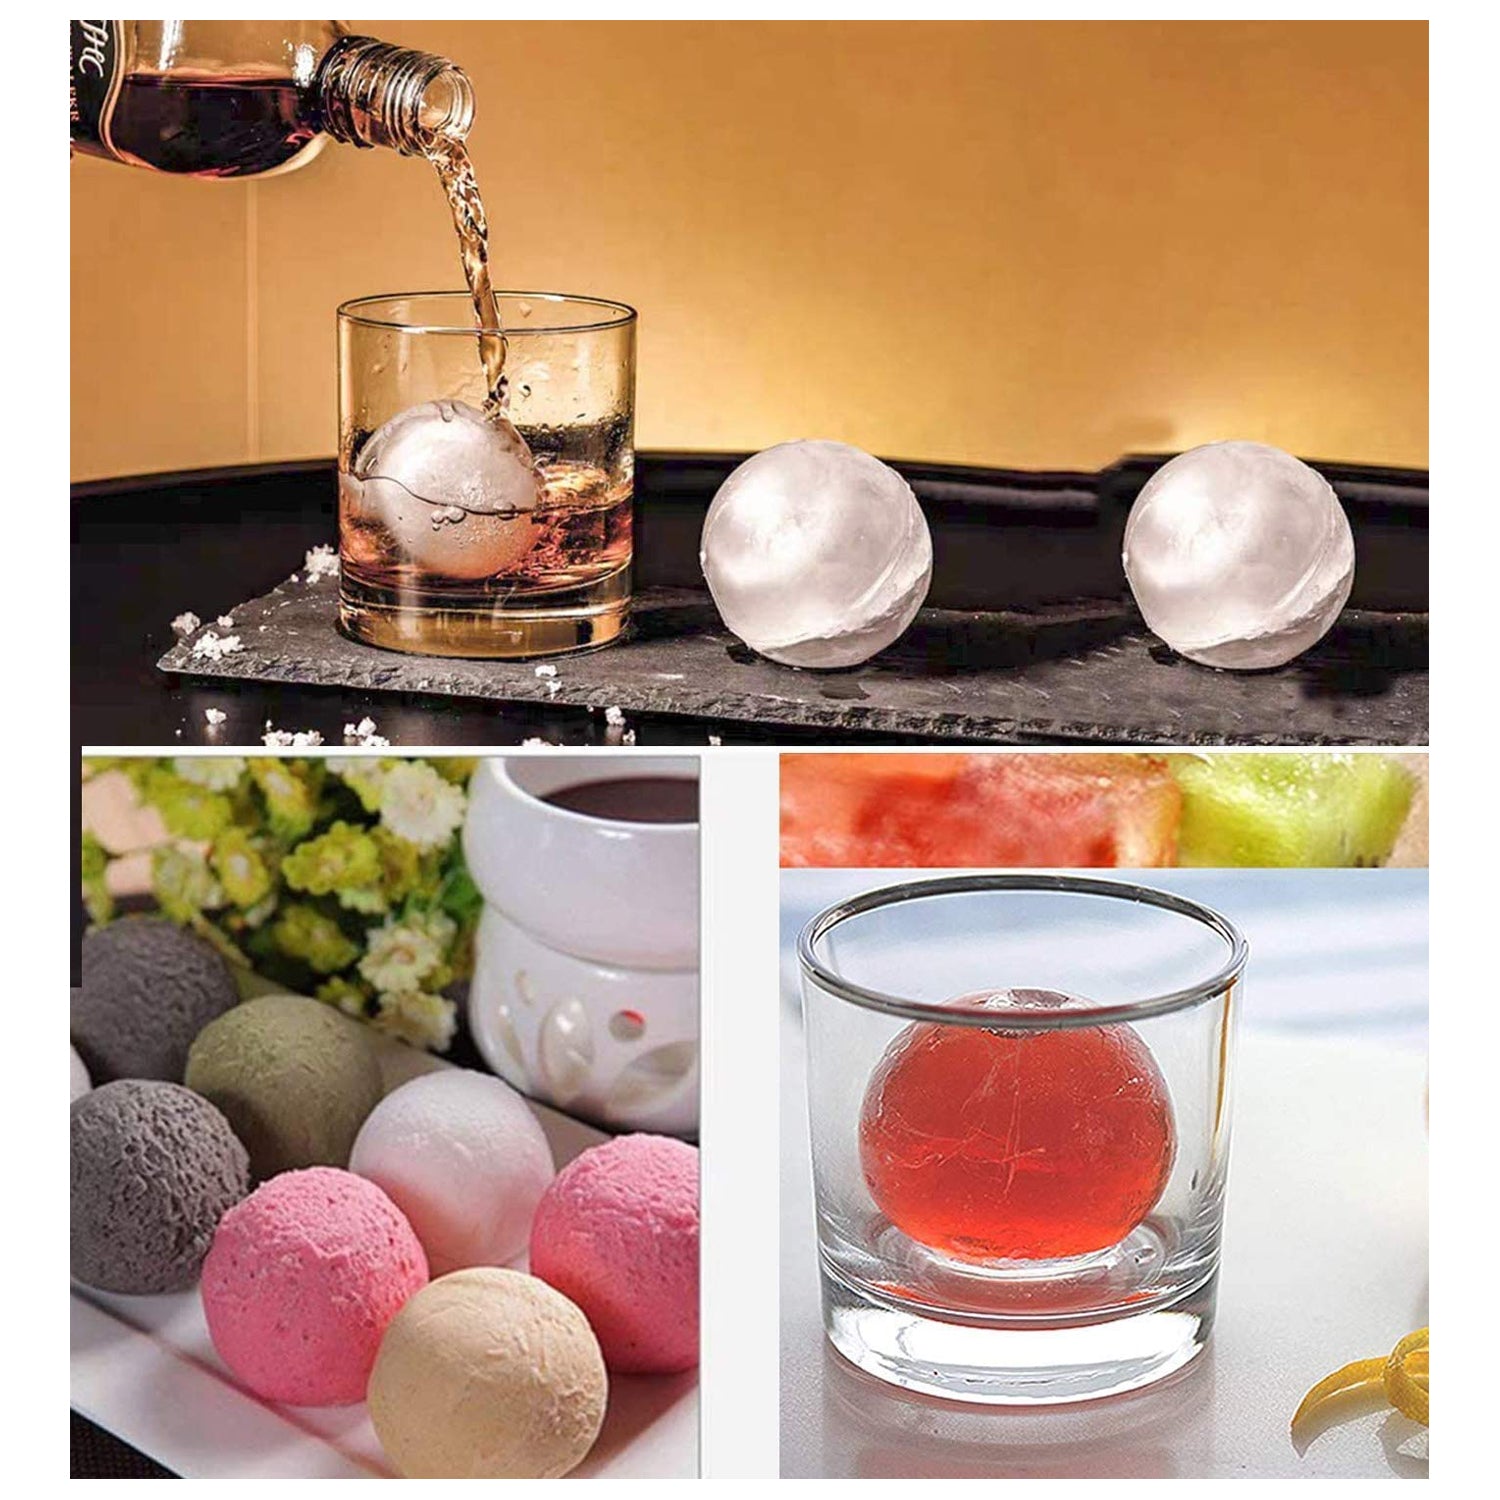 7164 Ice Trays for Freezer Whiskey Ice Cube Plastic Ball Maker Mold Sphere Mould 4 Holes New Ice Balls Party Brick Round Tray Bar Tool ice for Whiskey DeoDap